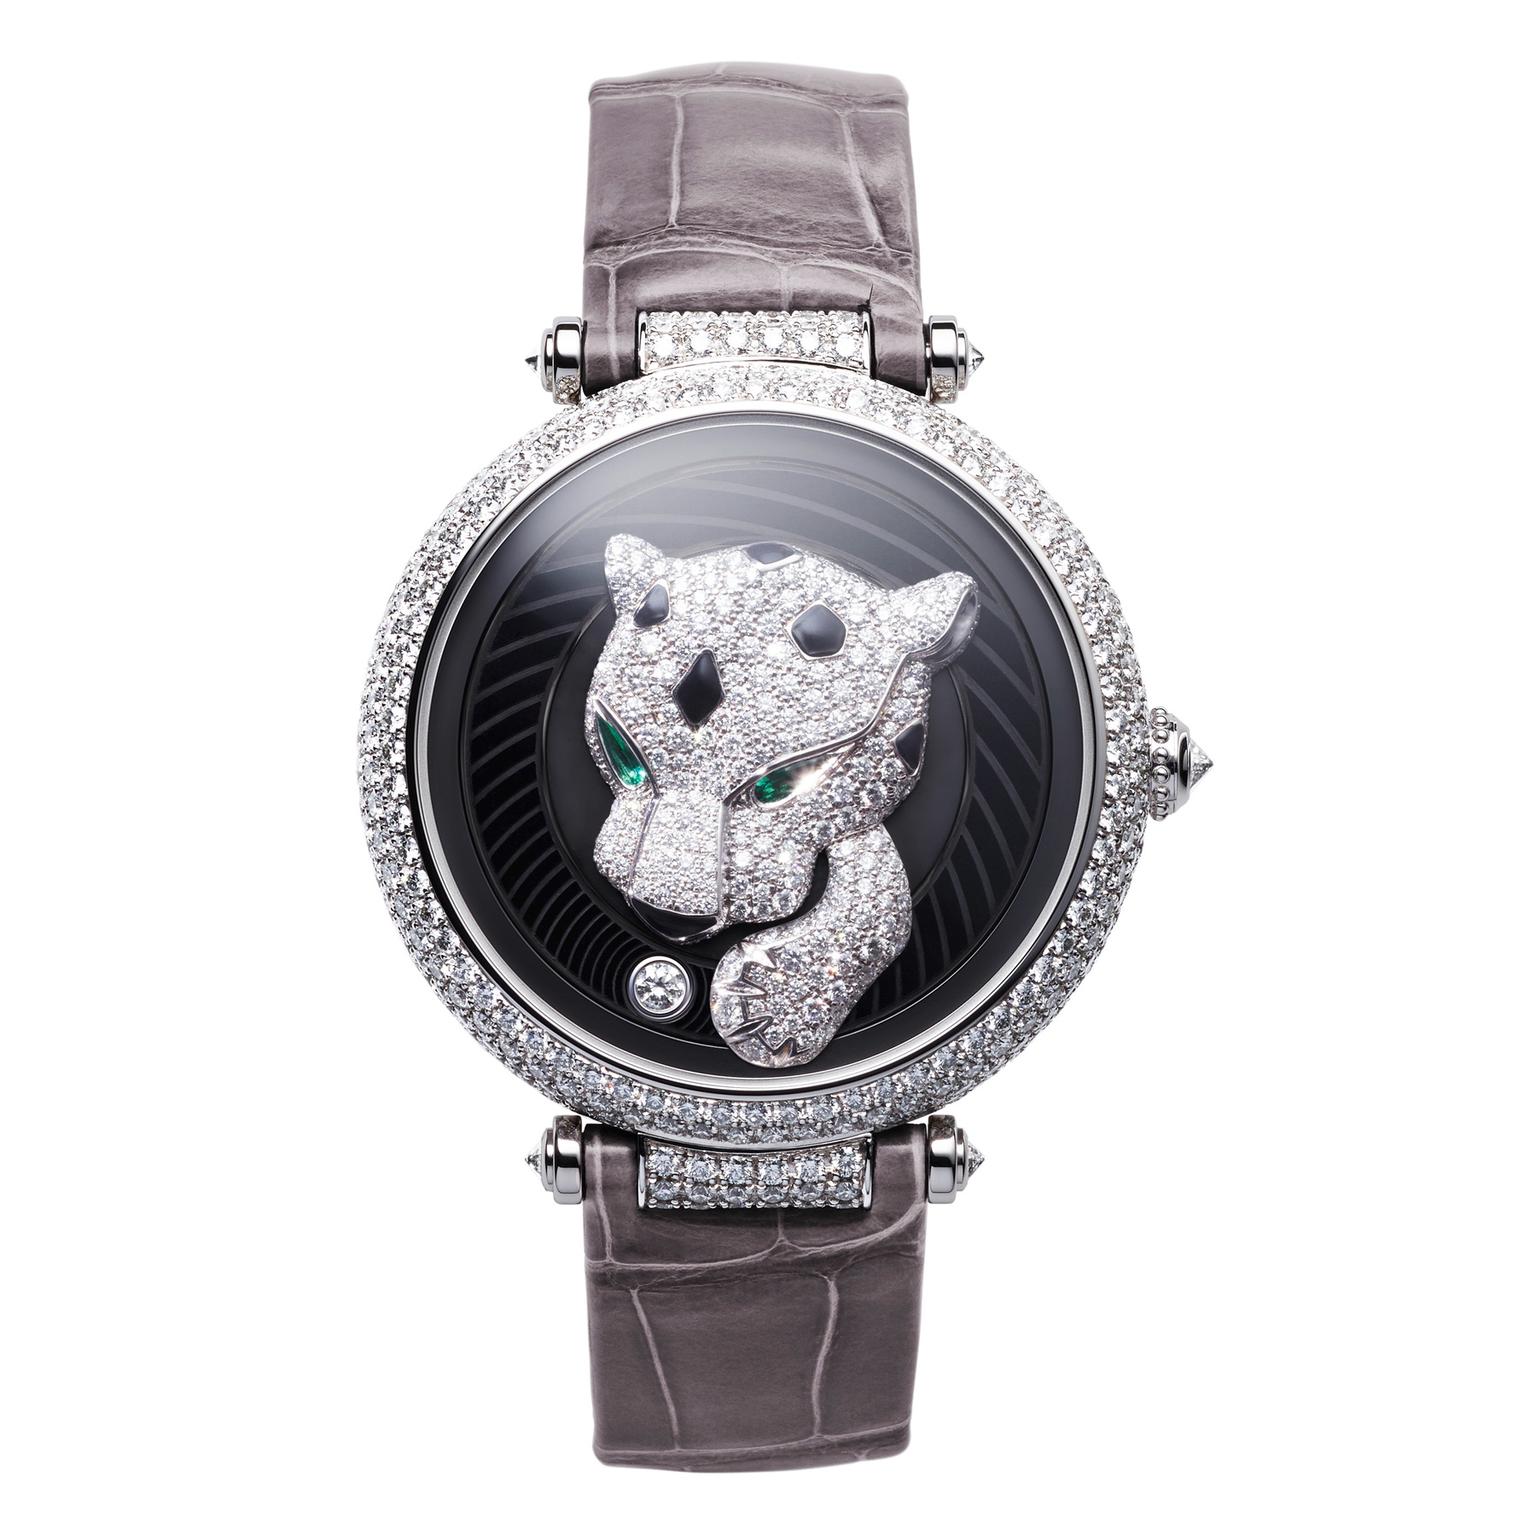 Cartier Panthere Joueuse watch